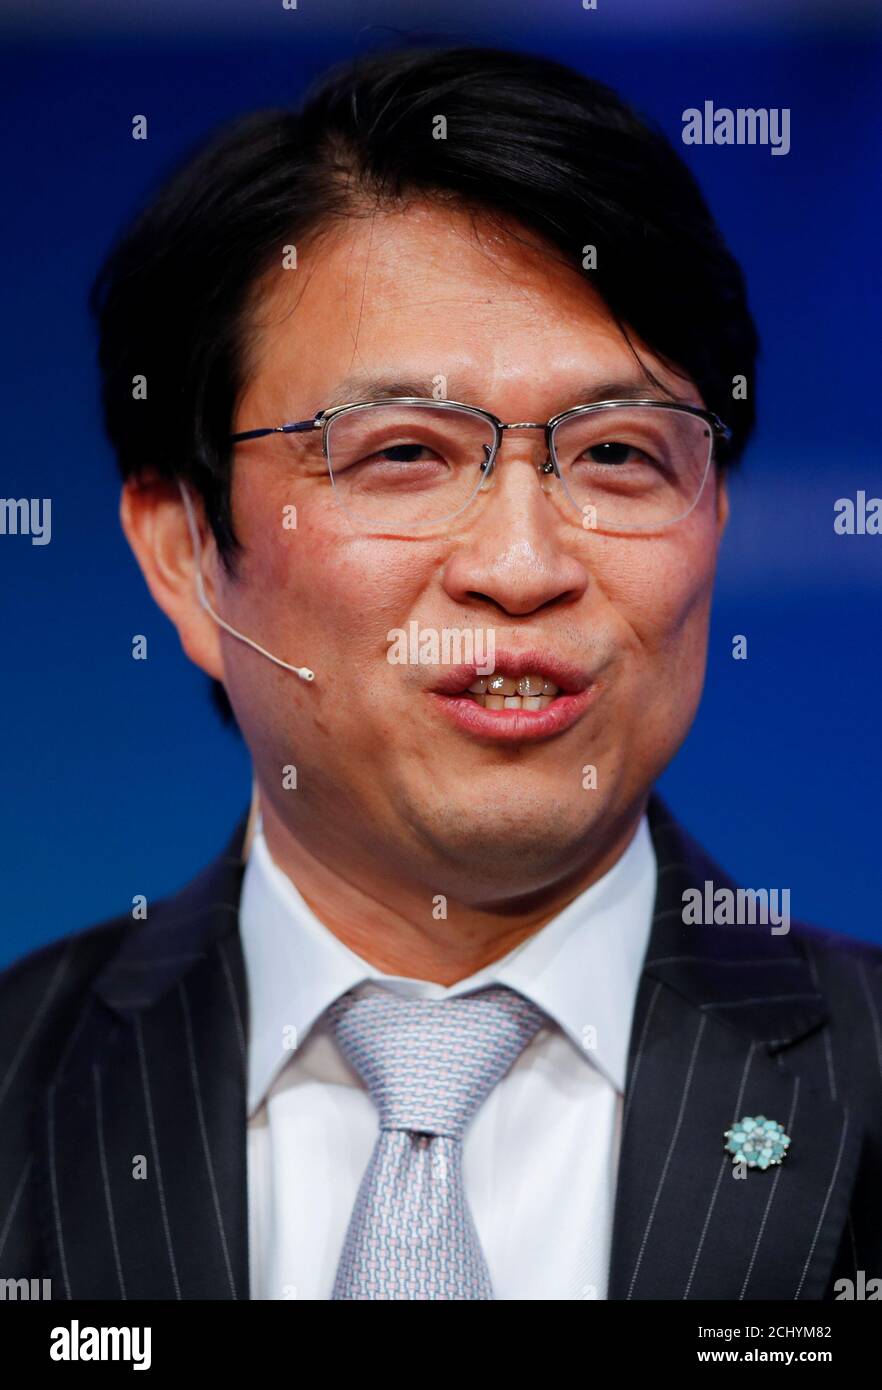 Hiromichi Mizuno Executive Managing Director and Chief Investment Officer  at Government Pension Investment Fund in Japan and Co-Chair at Global  Capital Markets Advisory Council for Milken Institute, speaks during the  Milken Institute's